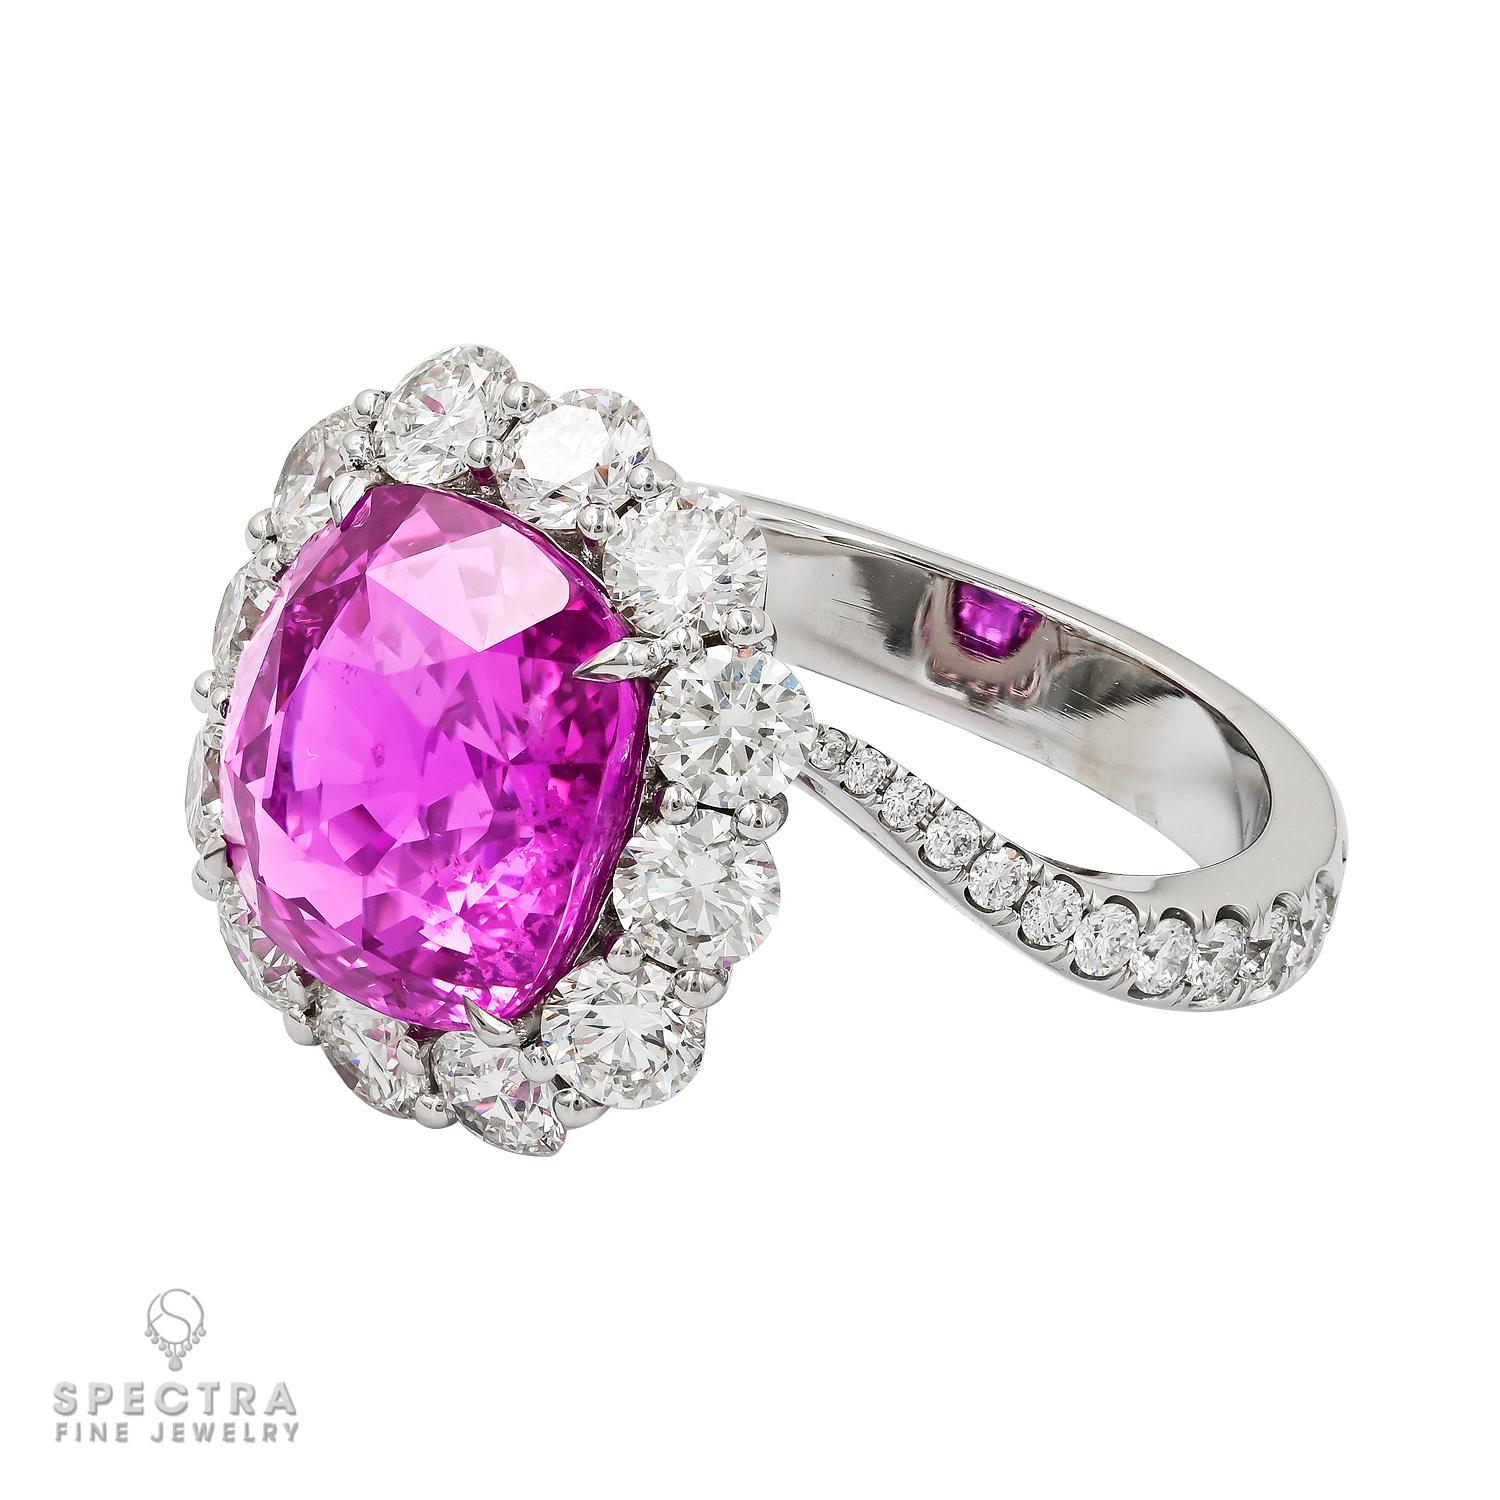 Elevate your jewelry collection with the enchanting beauty of this 7.08 carat Cushion Pink Sapphire Ring. Originating from Madagascar and boasting an unheated, natural allure, the centerpiece of this ring is a breathtaking 7.08 carat cushion-cut